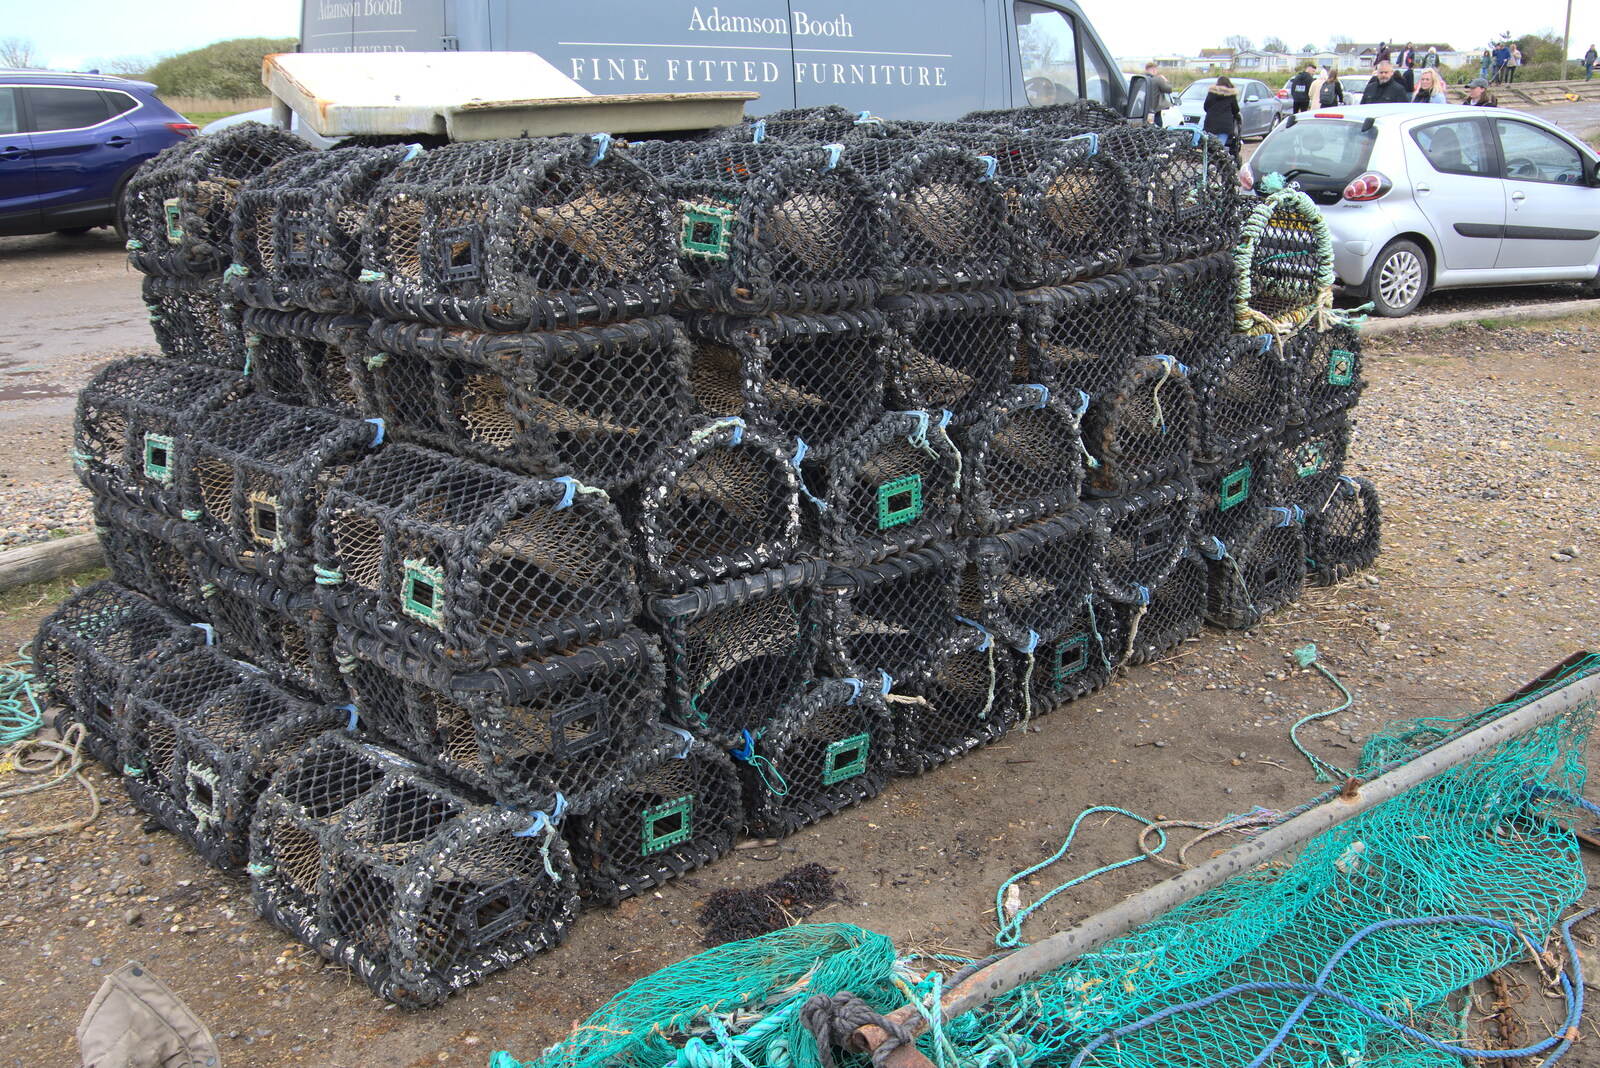 Another pile of lobster pots from A Chilly Trip to the Beach, Southwold Harbour, Suffolk - 2nd May 2021